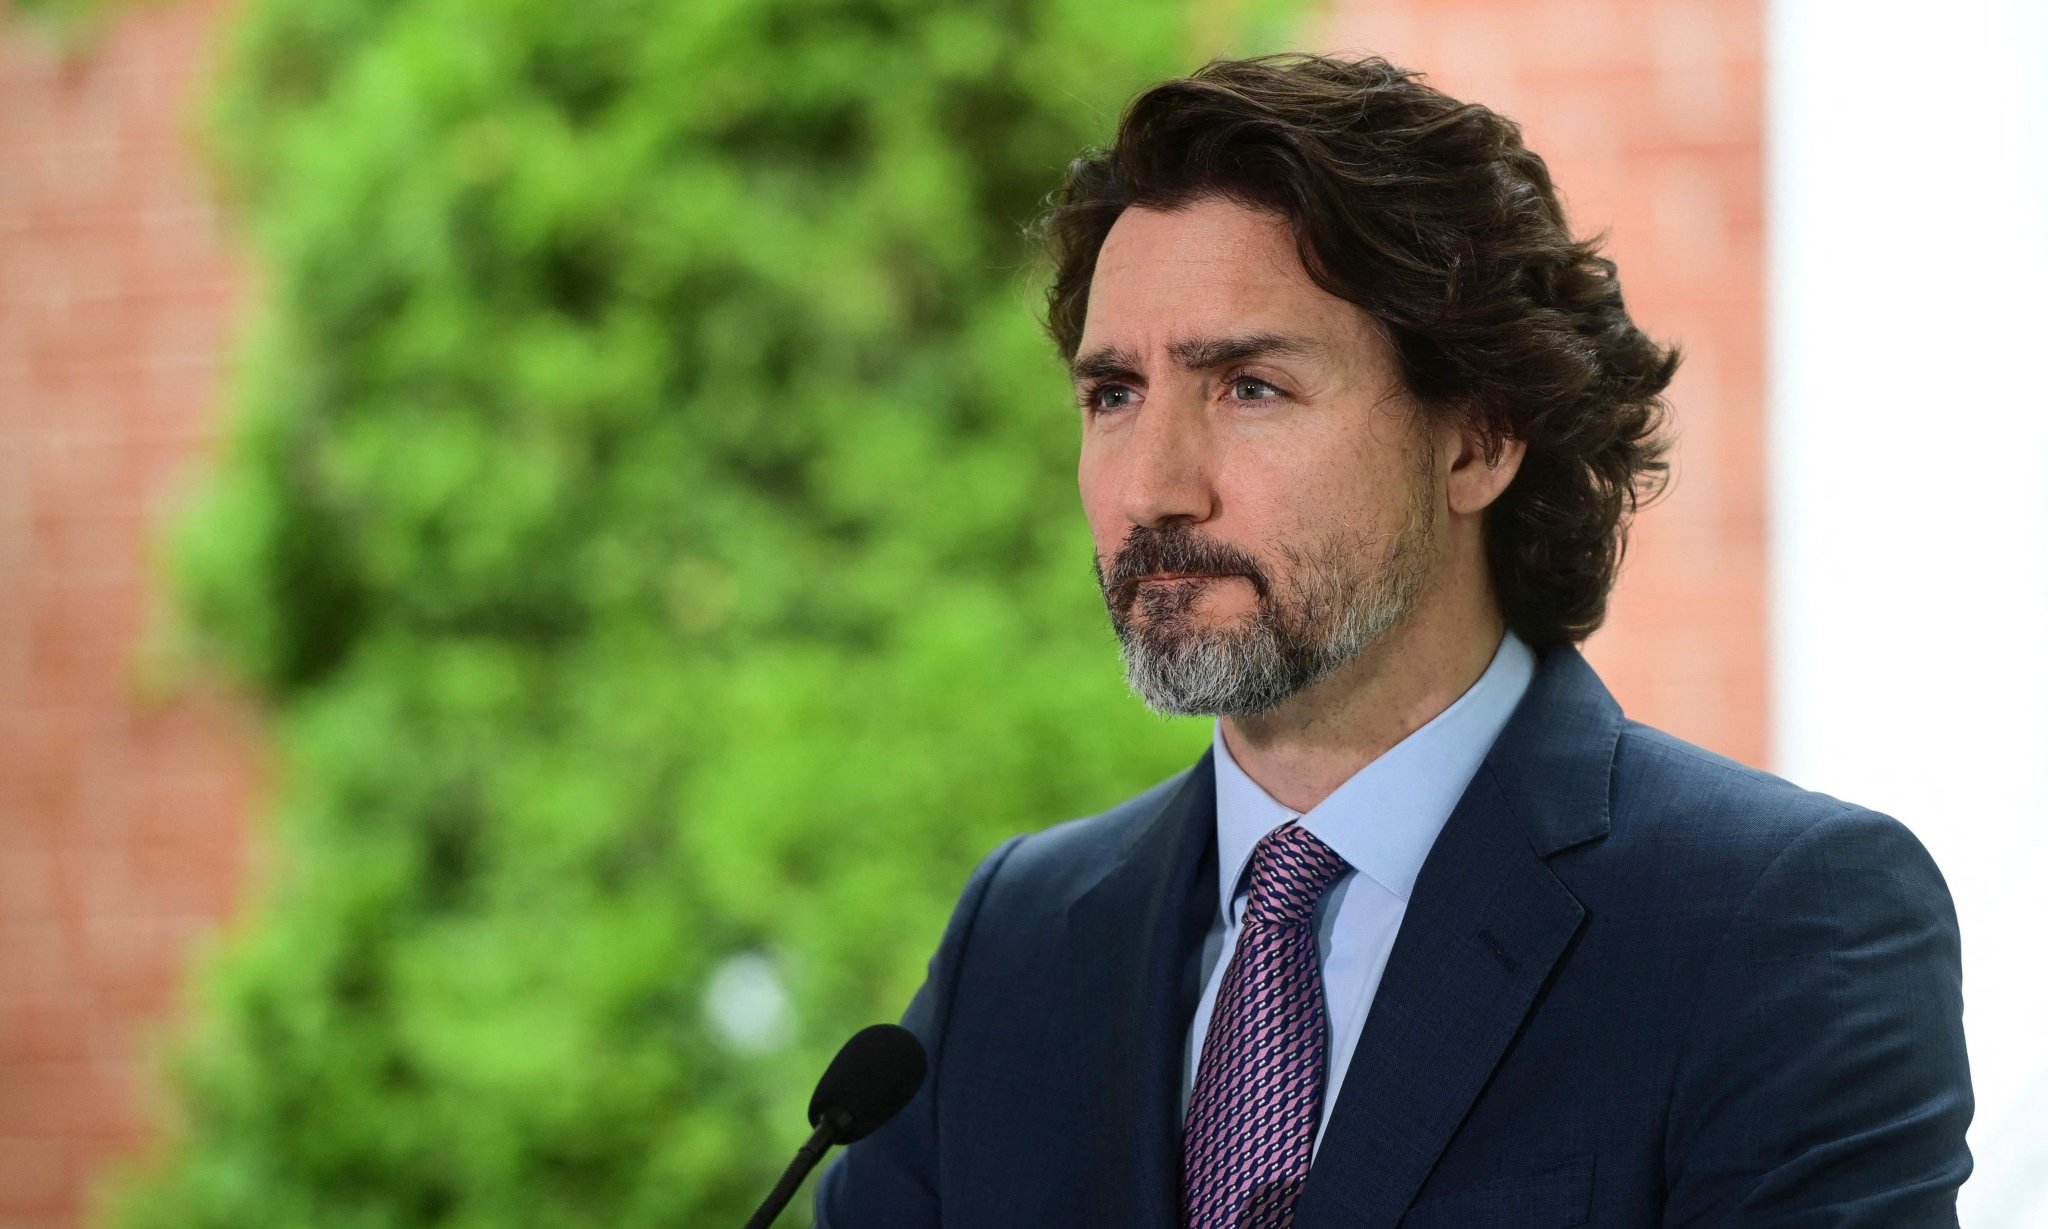 Trudeau says Canadians ‘horrified and ashamed’ of forced assimilation